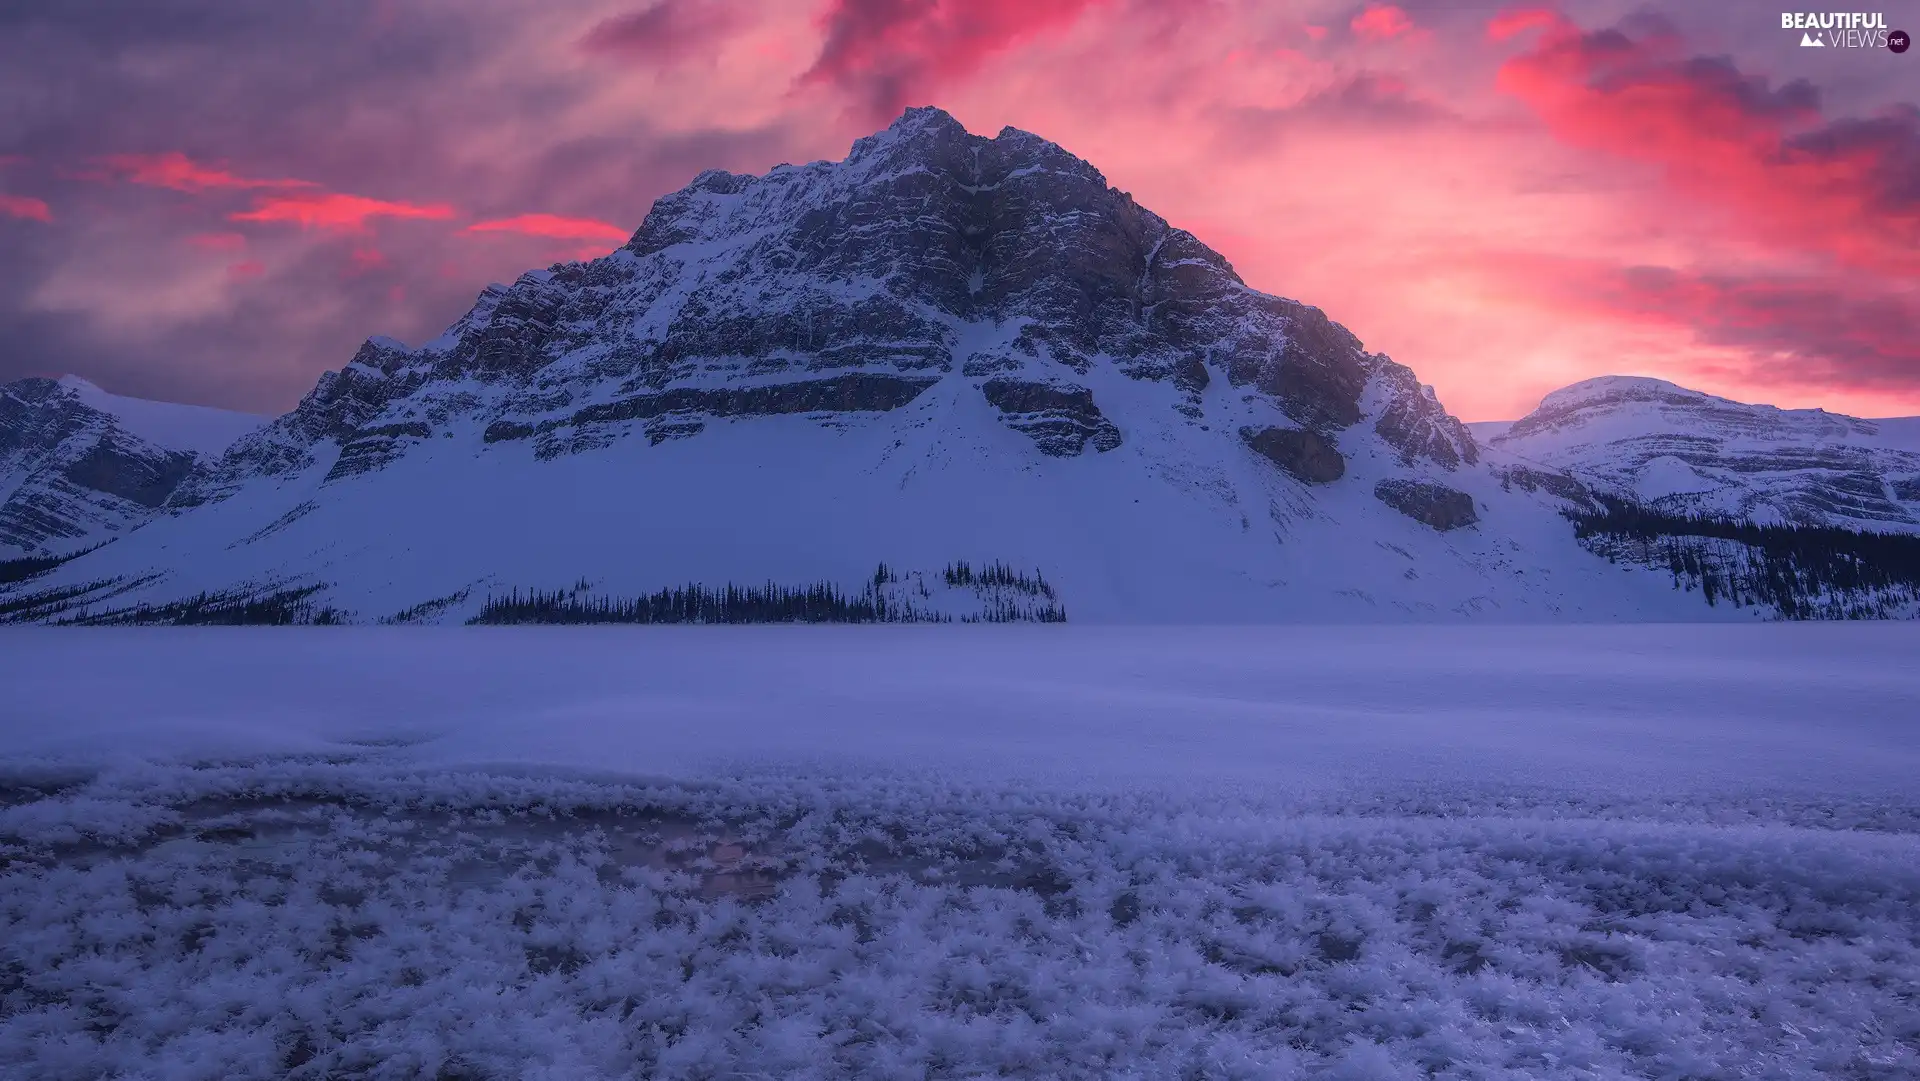 Mountains, winter, Crowfoot Mountain, trees, Banff National Park, Canada, Great Sunsets, Bow Lake, viewes